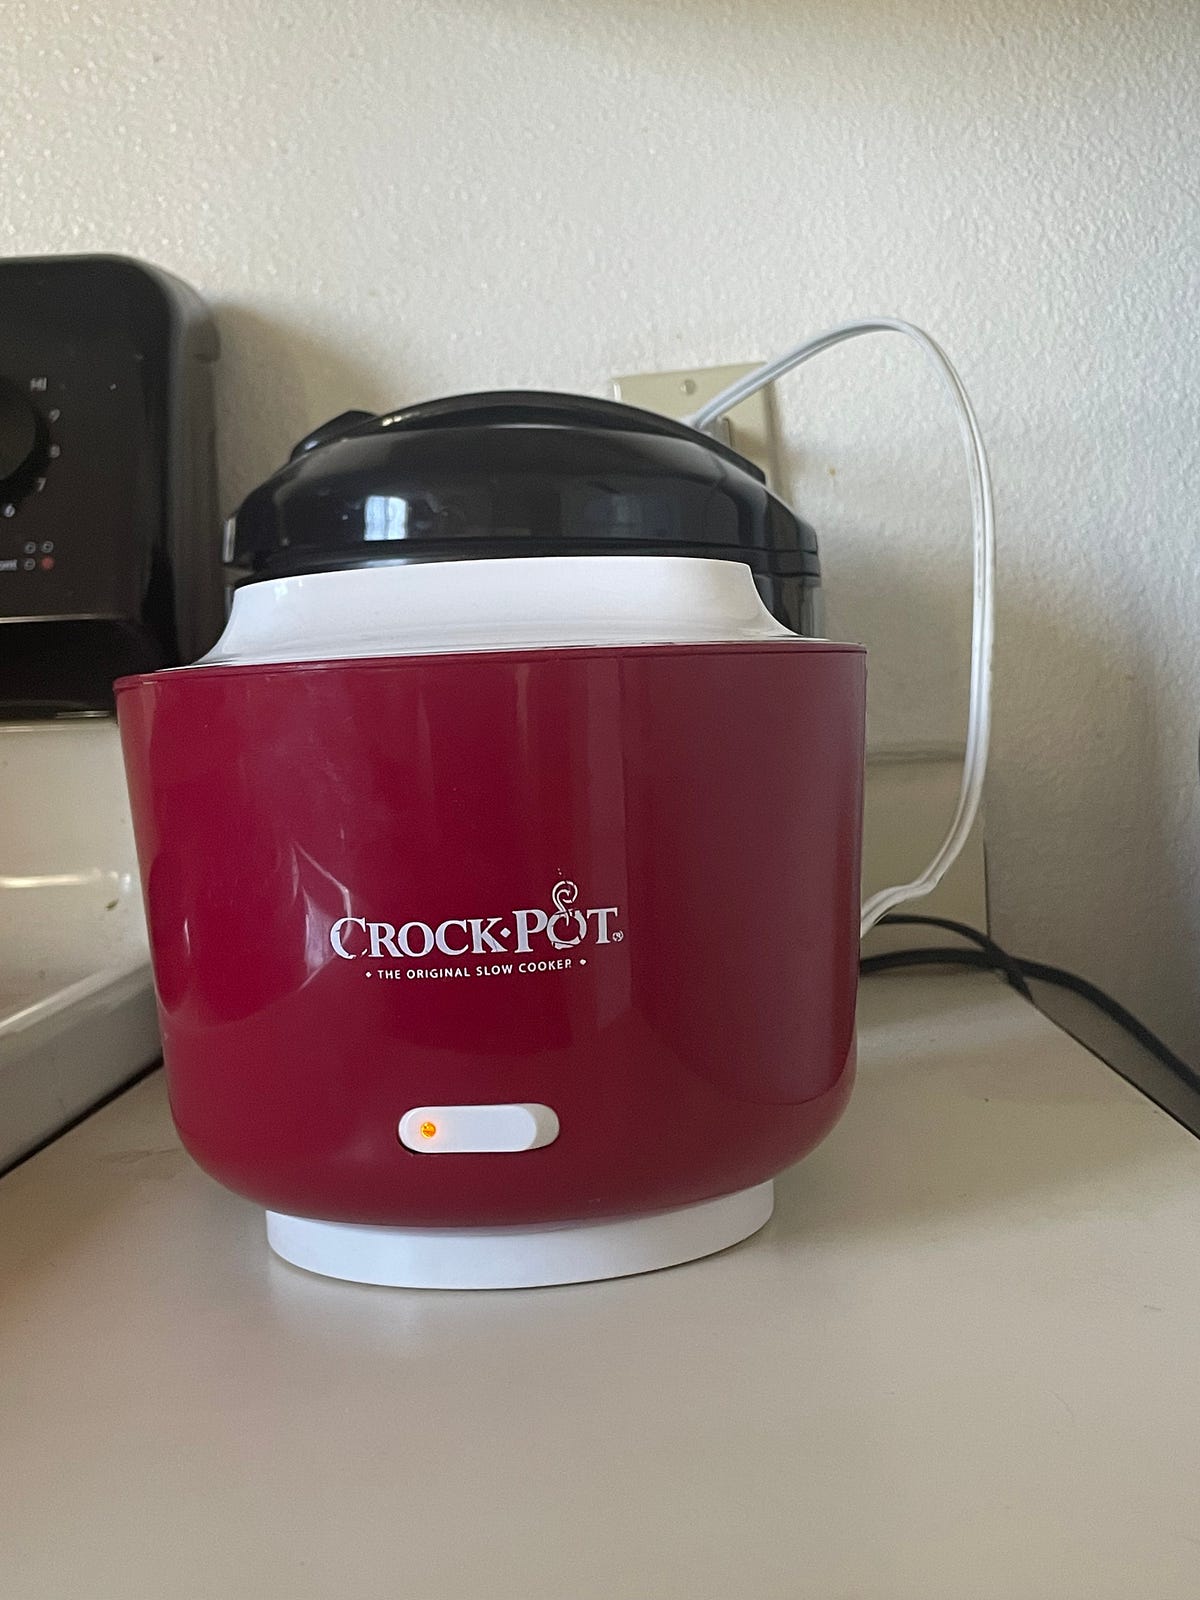 Crockpot's Nifty Warming Lunchbox Is 33% Off Just in Time for Fall - CNET